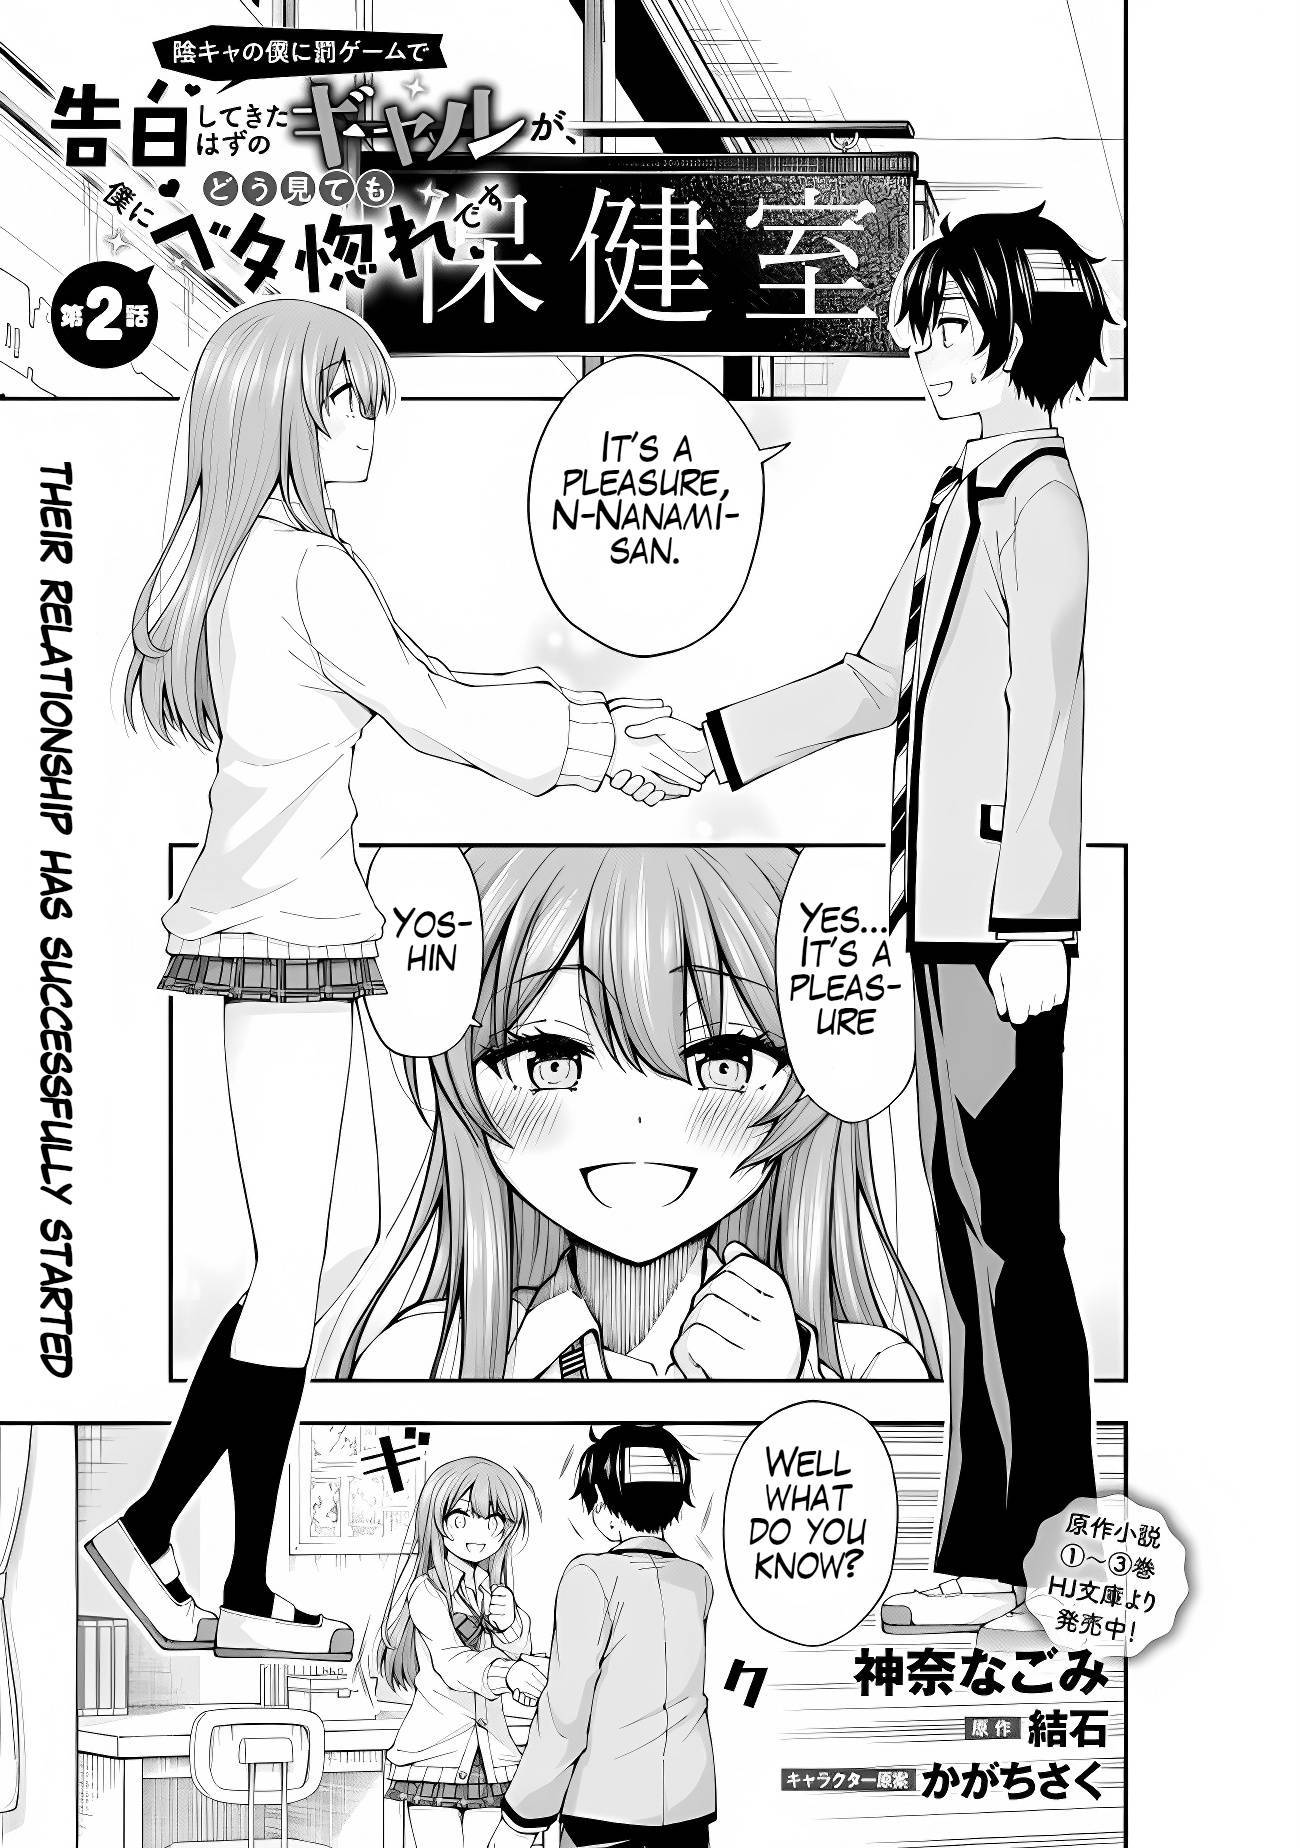 The Gal Who Was Meant to Confess to Me as a Game Punishment Has Apparently Fallen in Love with Me - chapter 2 - #1